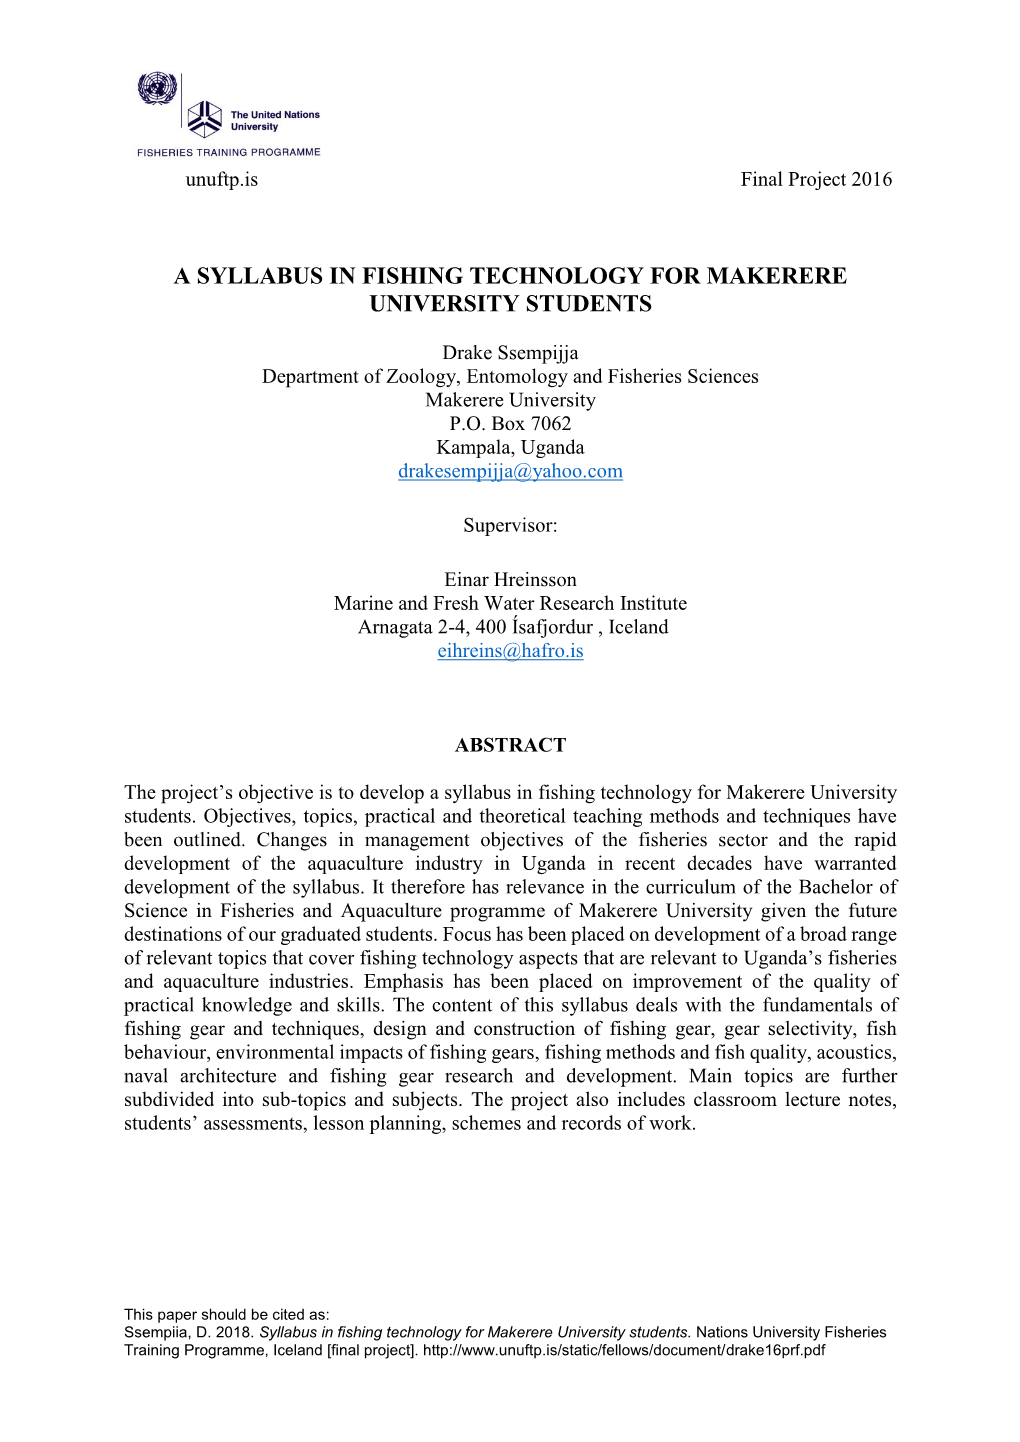 A Syllabus in Fishing Technology for Makerere University Students